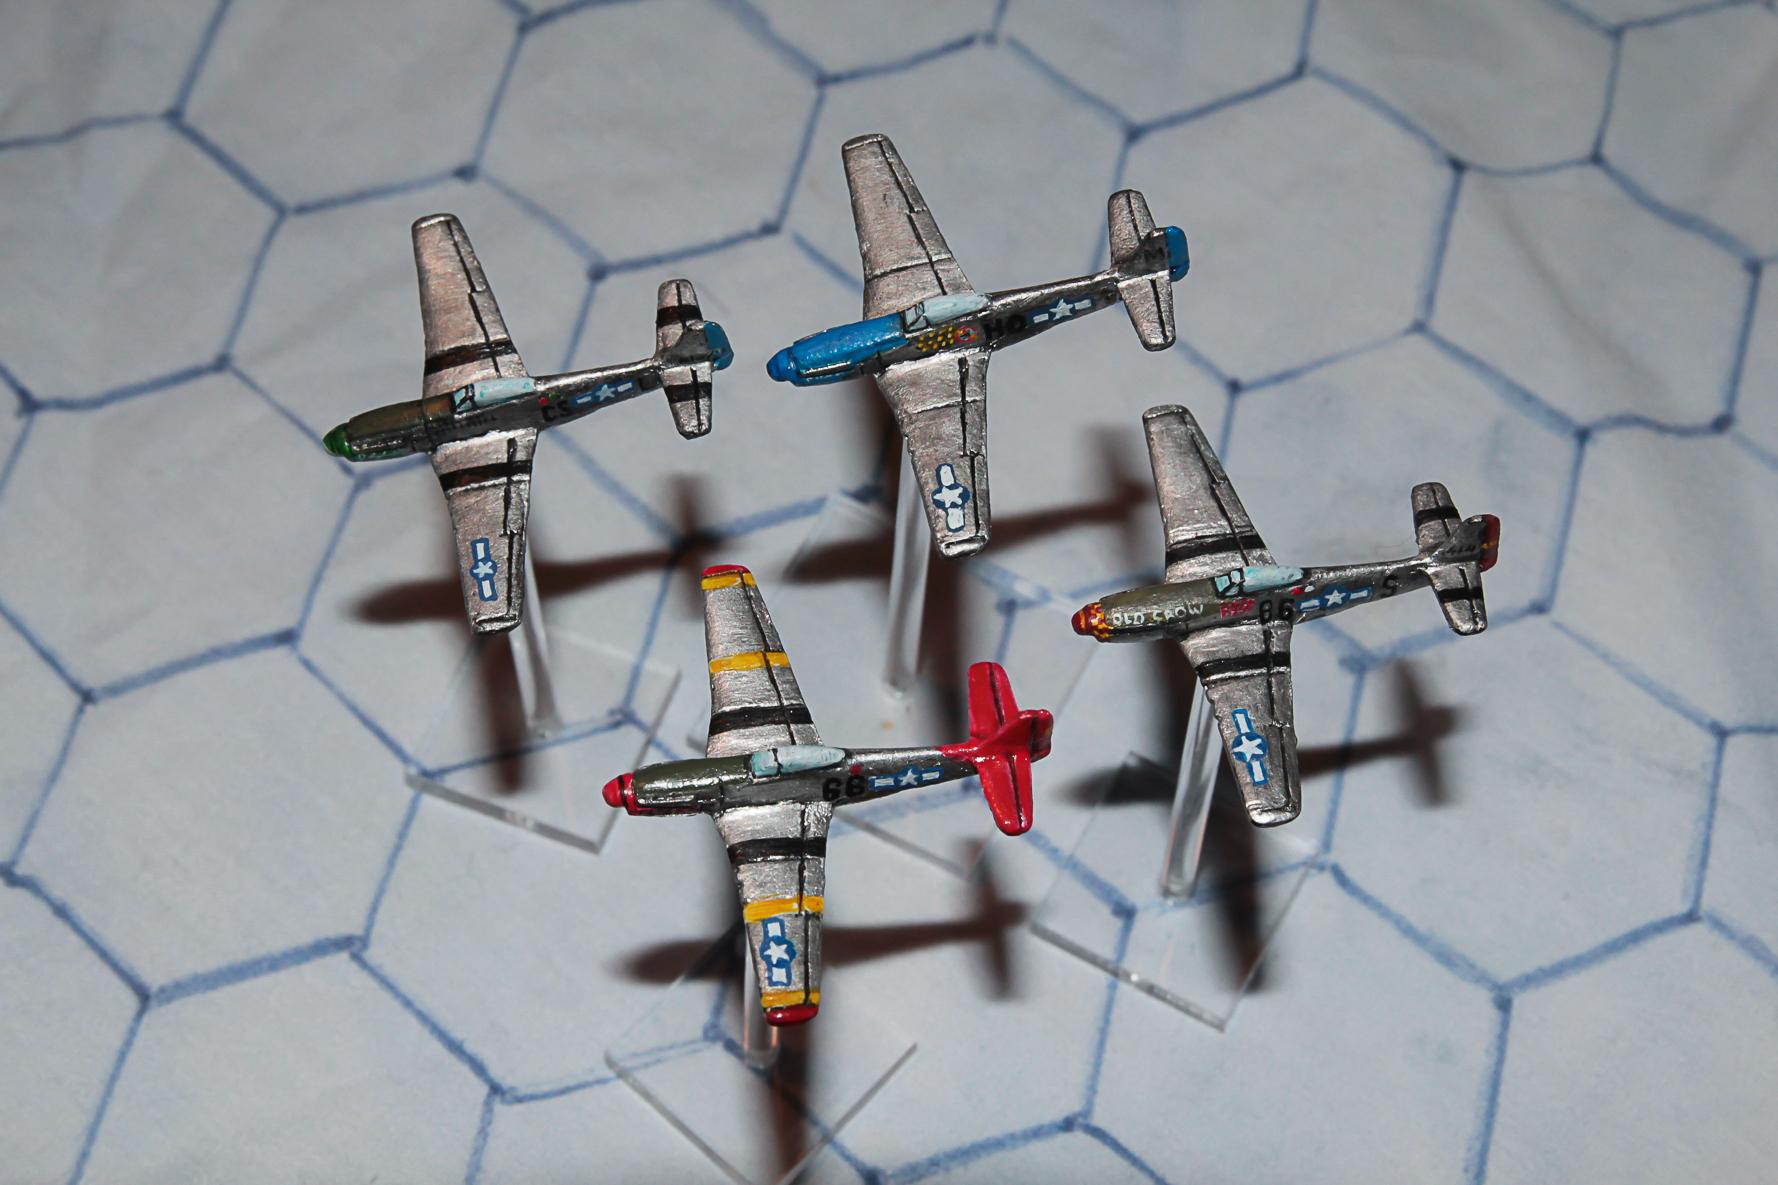 1:300 Scale, 6mm Scale, Air Combat, Airborne, Aircraft, Airplane, Check Your 6!, Fighter, Fliers, Historical, P-51, Usaaf, World War 2